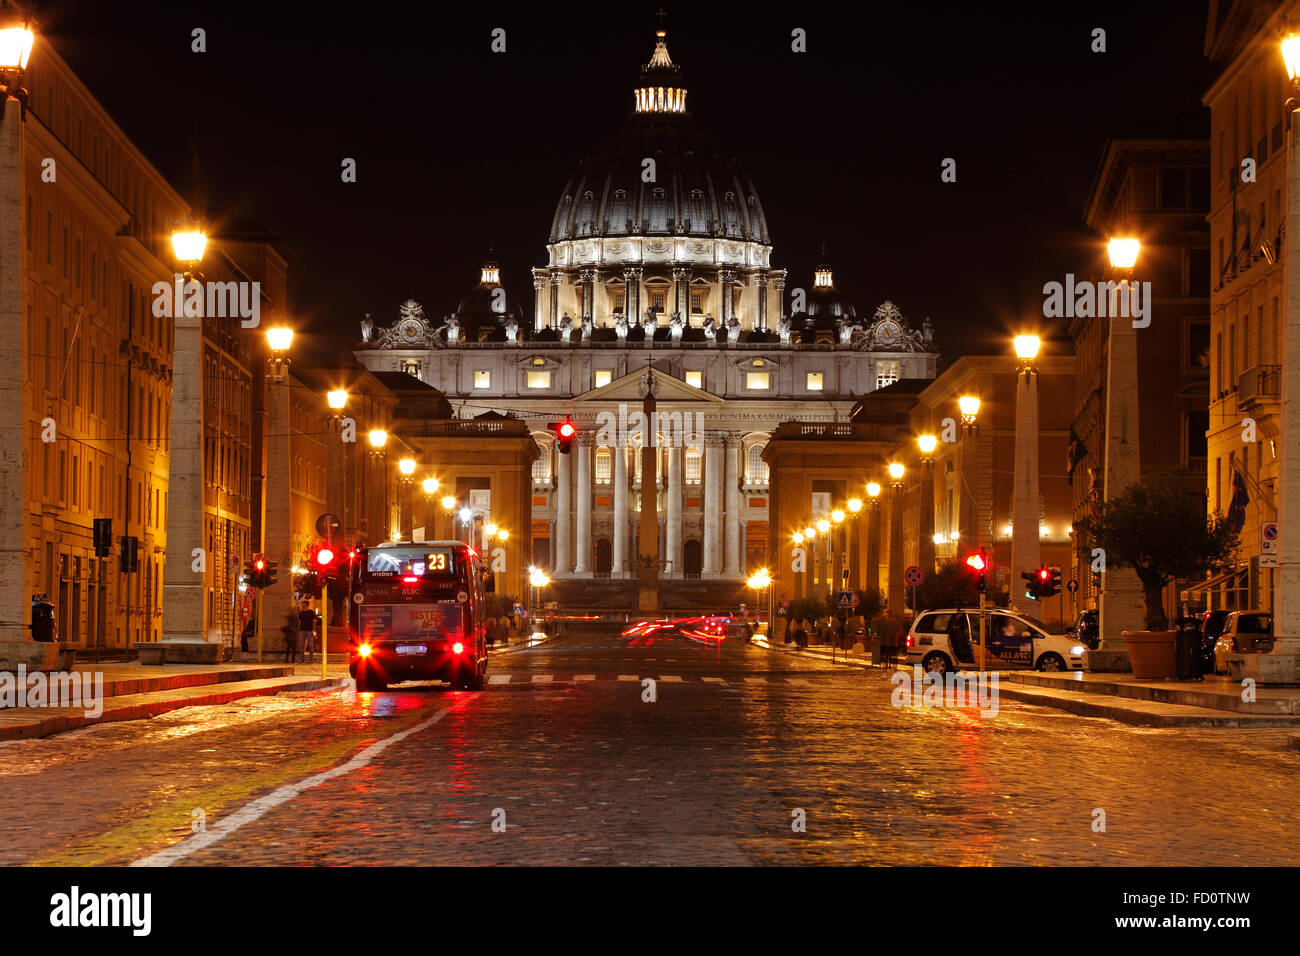 St. Peter's Basilica Rome St. Peter's and street Via della Conciliazone in Rome at dusk, Italy Stock Photo